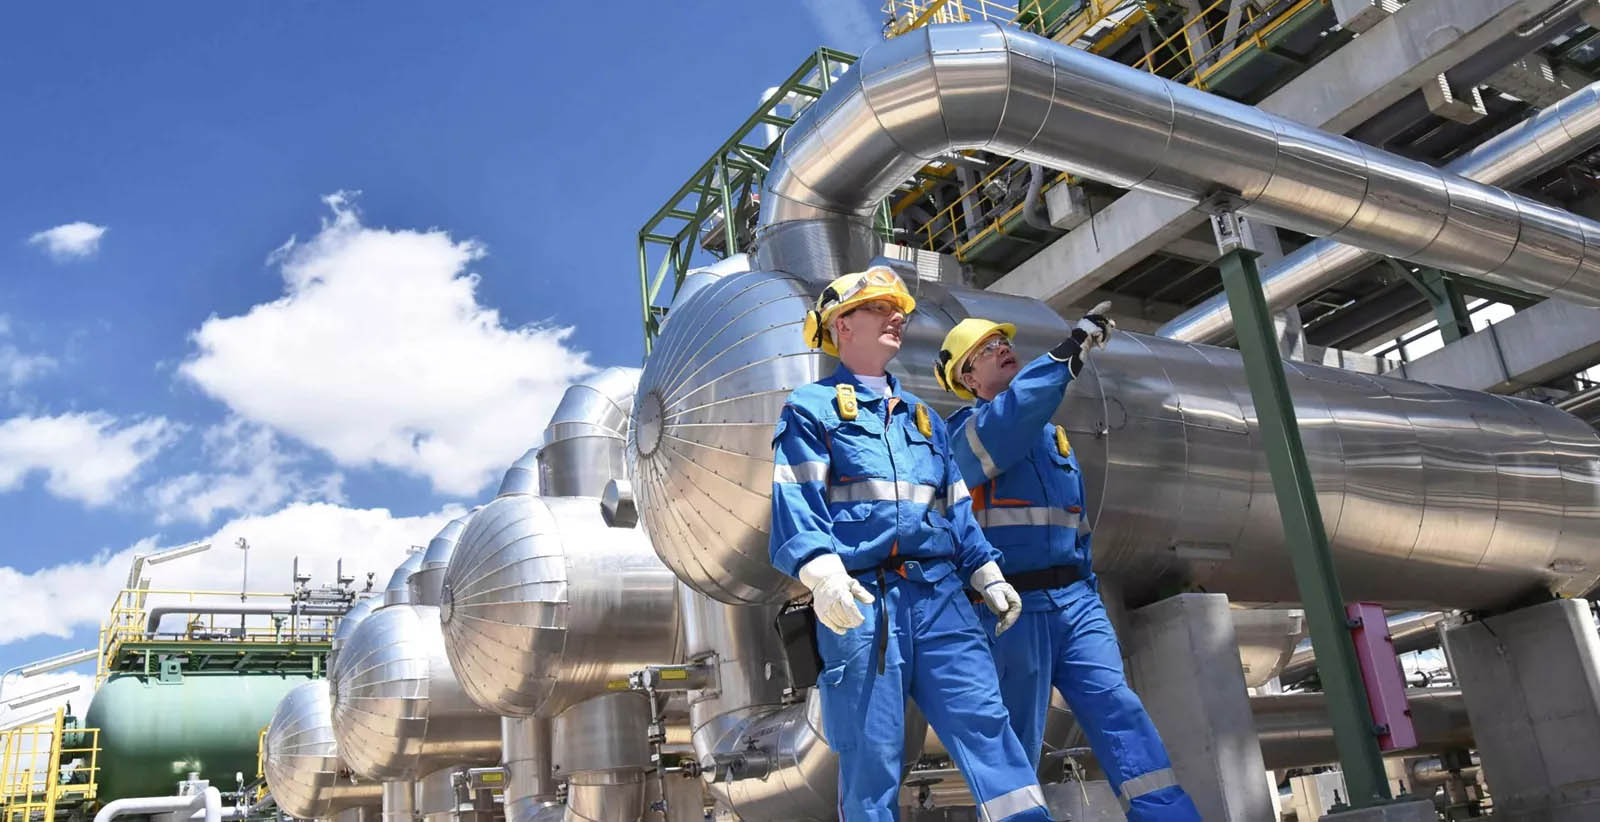 Work at Height Safety Solutions for Petrochemical Plants